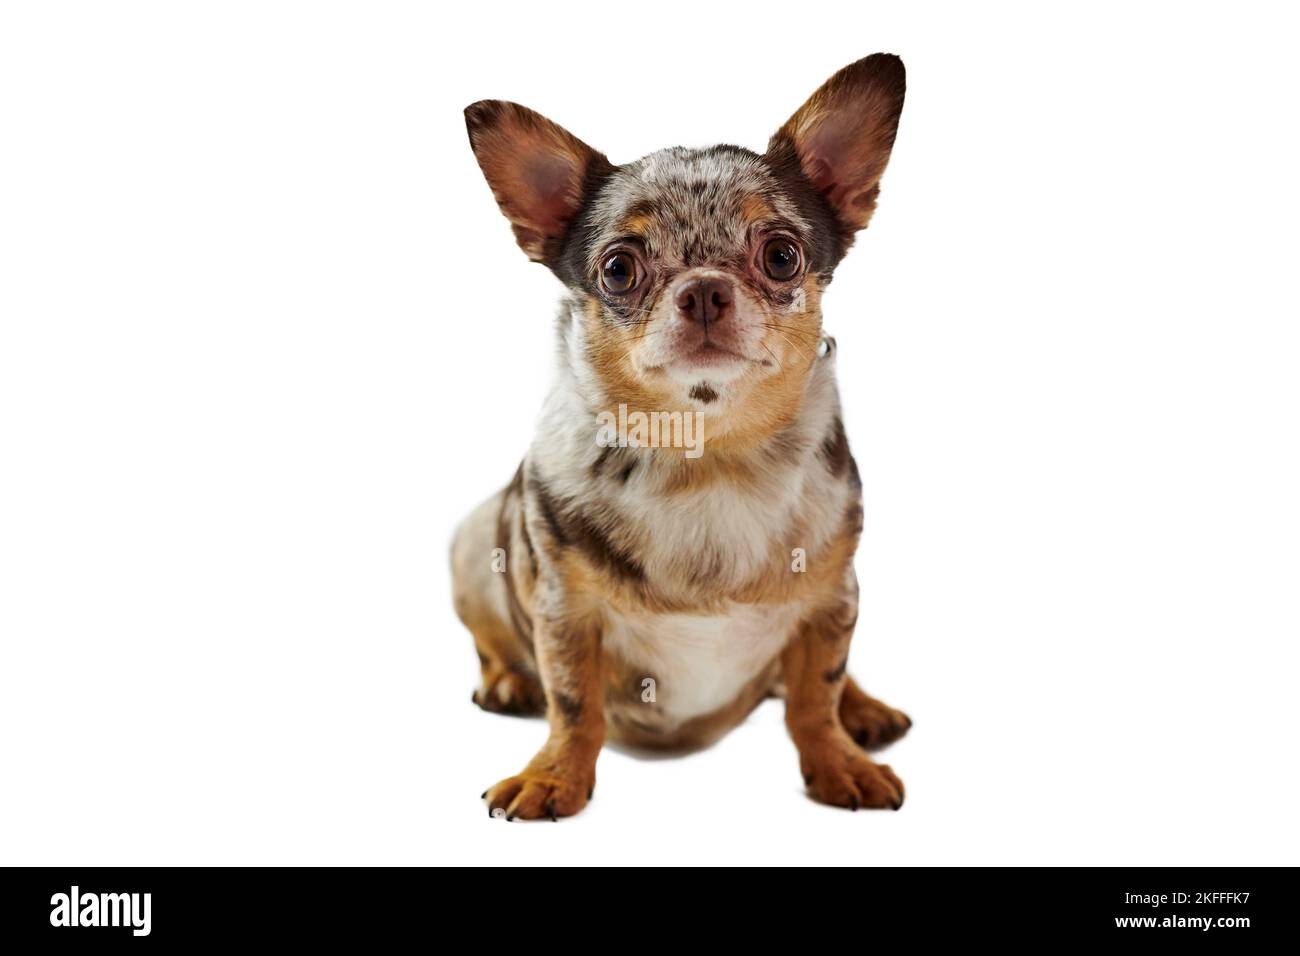 Fat pregnant short haired chihuahua dog with big ears isolated on white background, cute adorable little chihuahua dog. Funny brown pregnant chihuahua Stock Photo